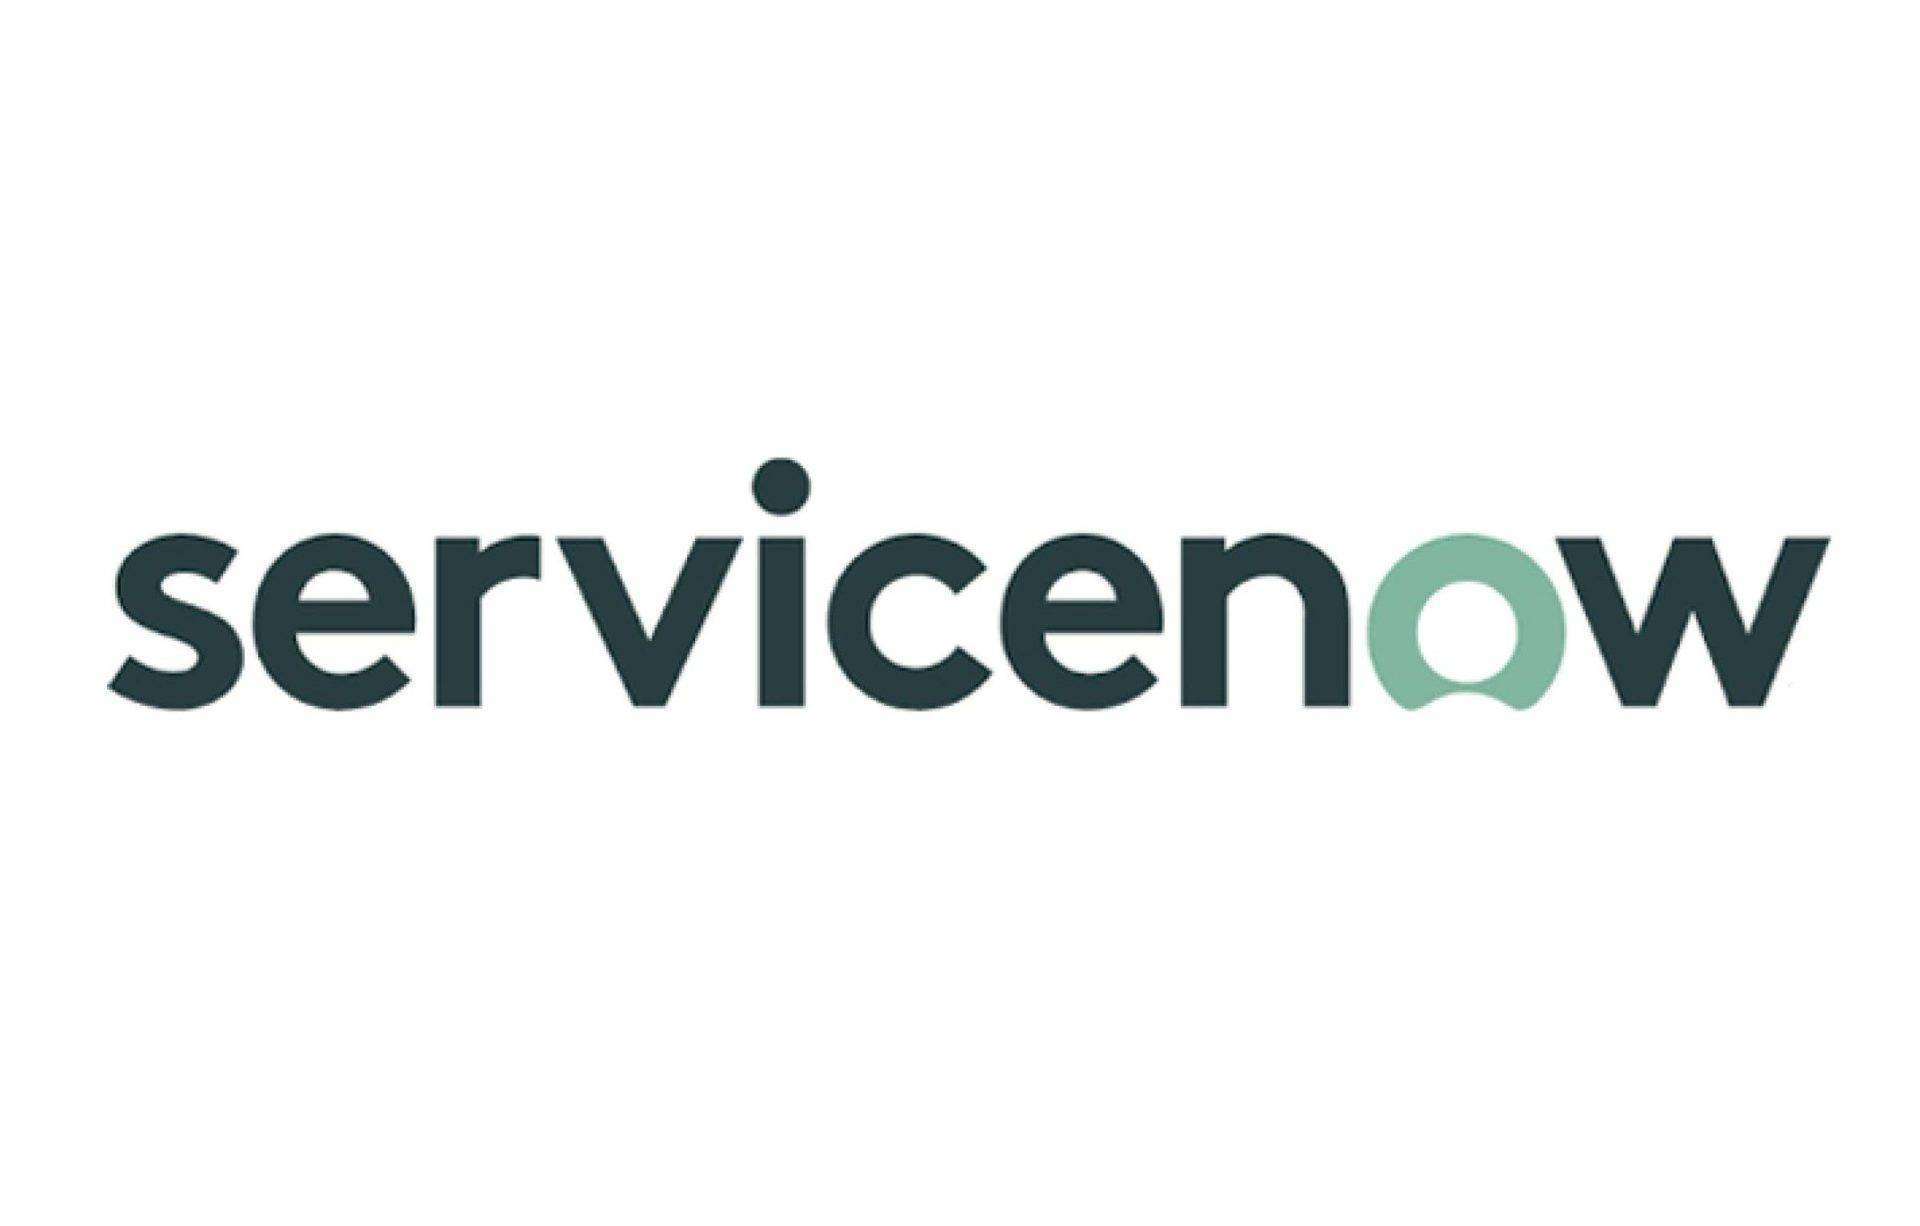 ITSM Certification Become Servicenow Certified In One Night With Us